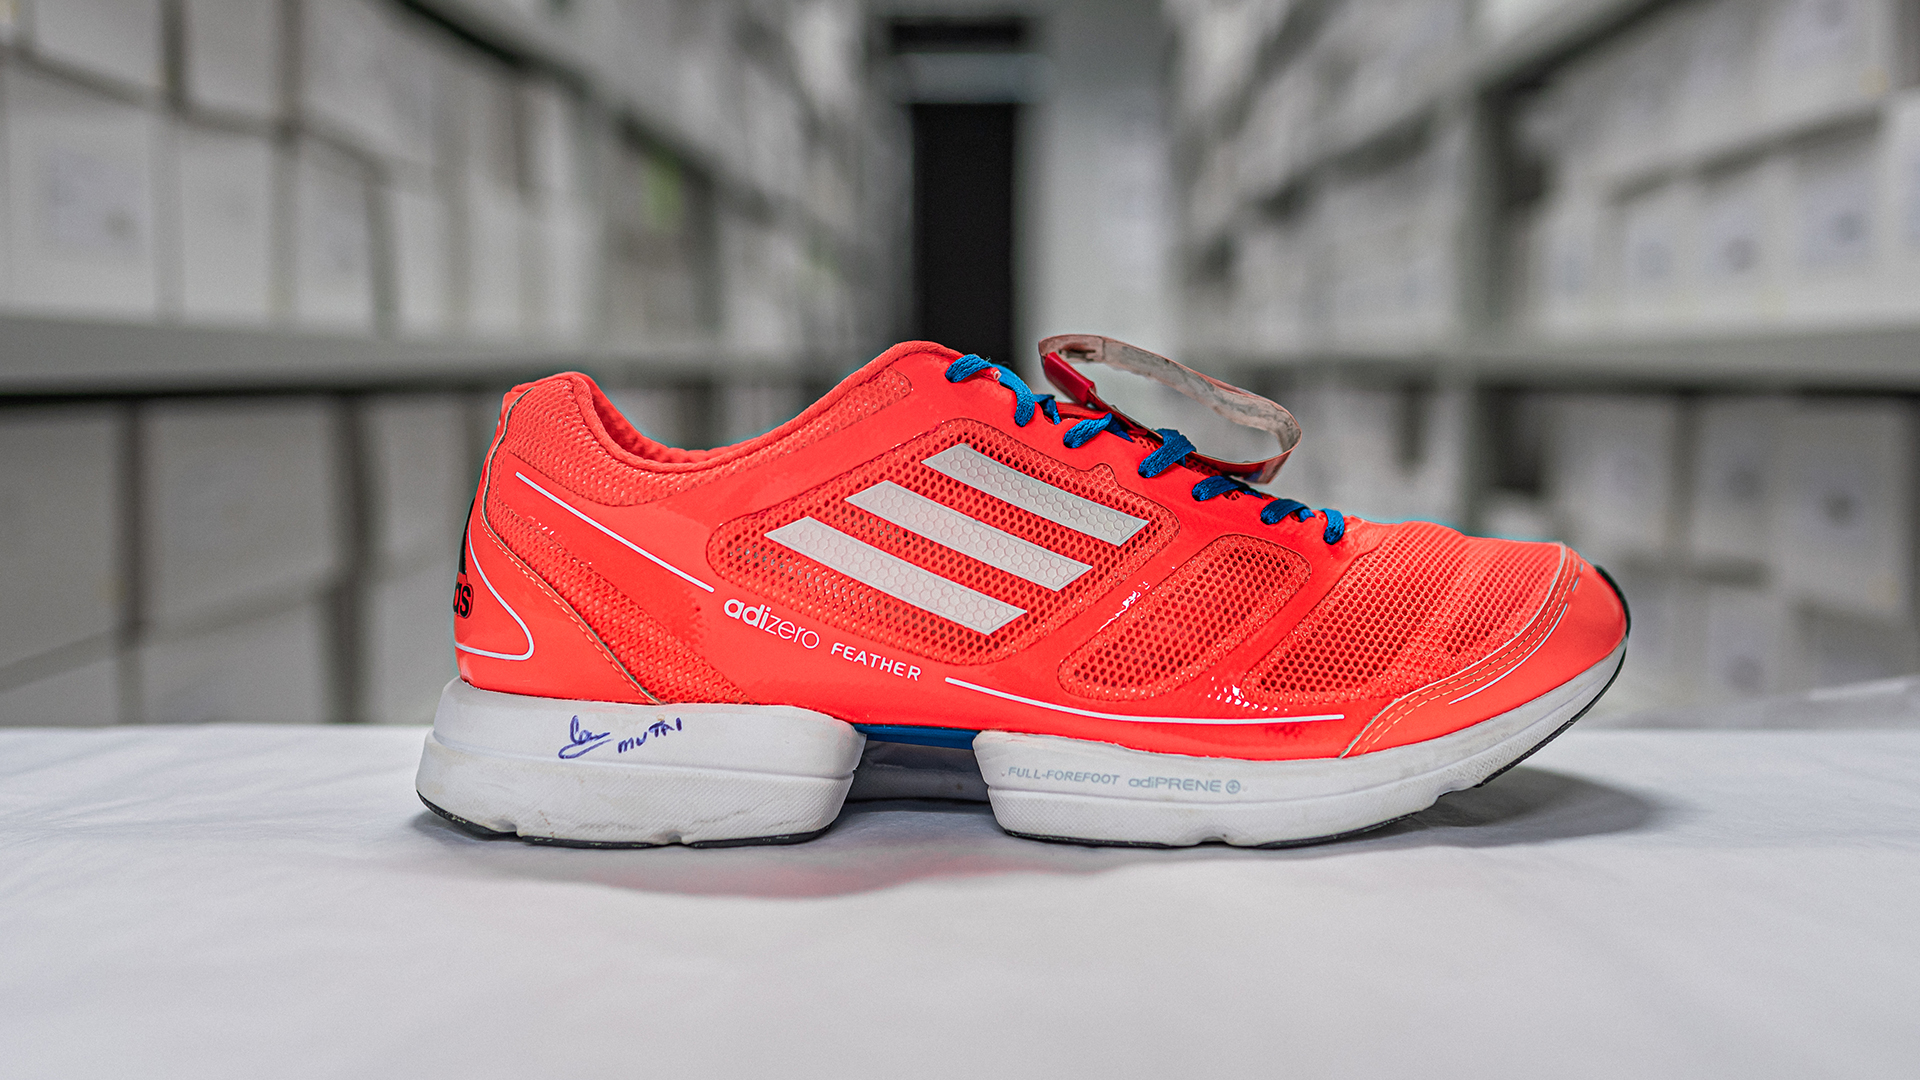 adidas Running on "At the 2011 Boston Marathon, Geoffrey Kiprono Mutai sped through the streets of Boston in the adizero Feather in a lightning-fast time of 2:03.02. It may not have